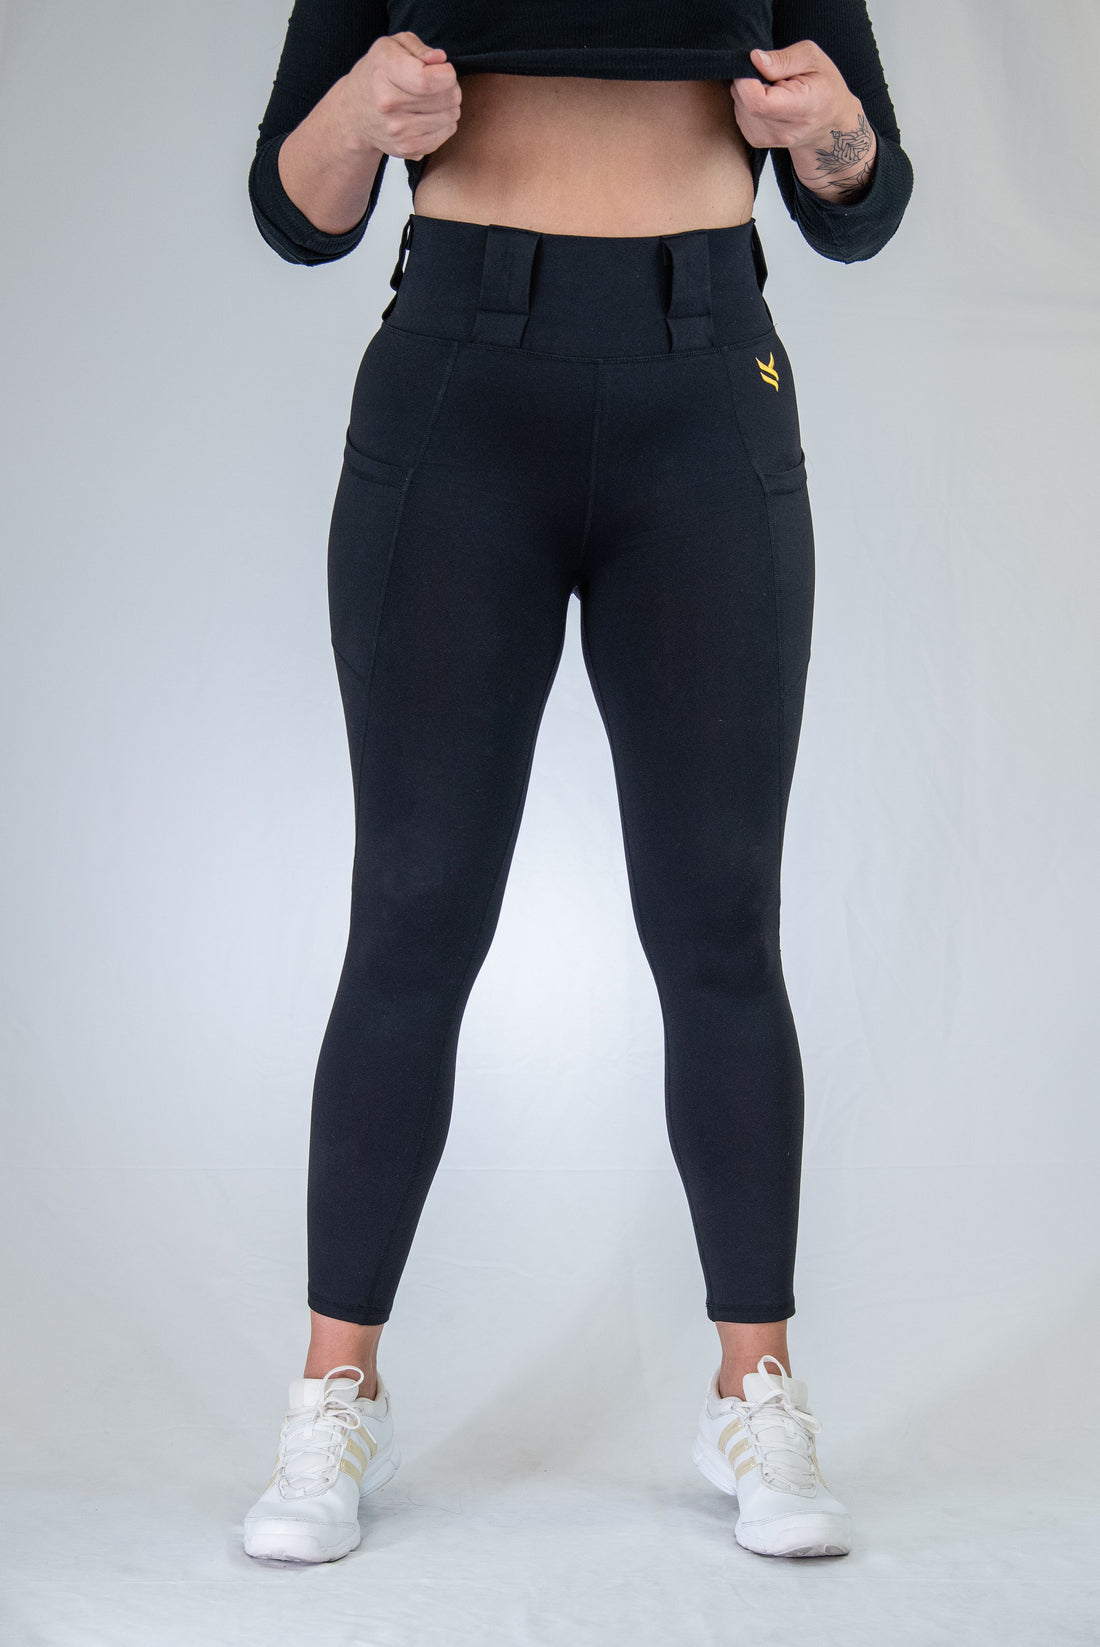 TRYBE Tactical Front/Rear Concealed Carry Legging - Womens, Black